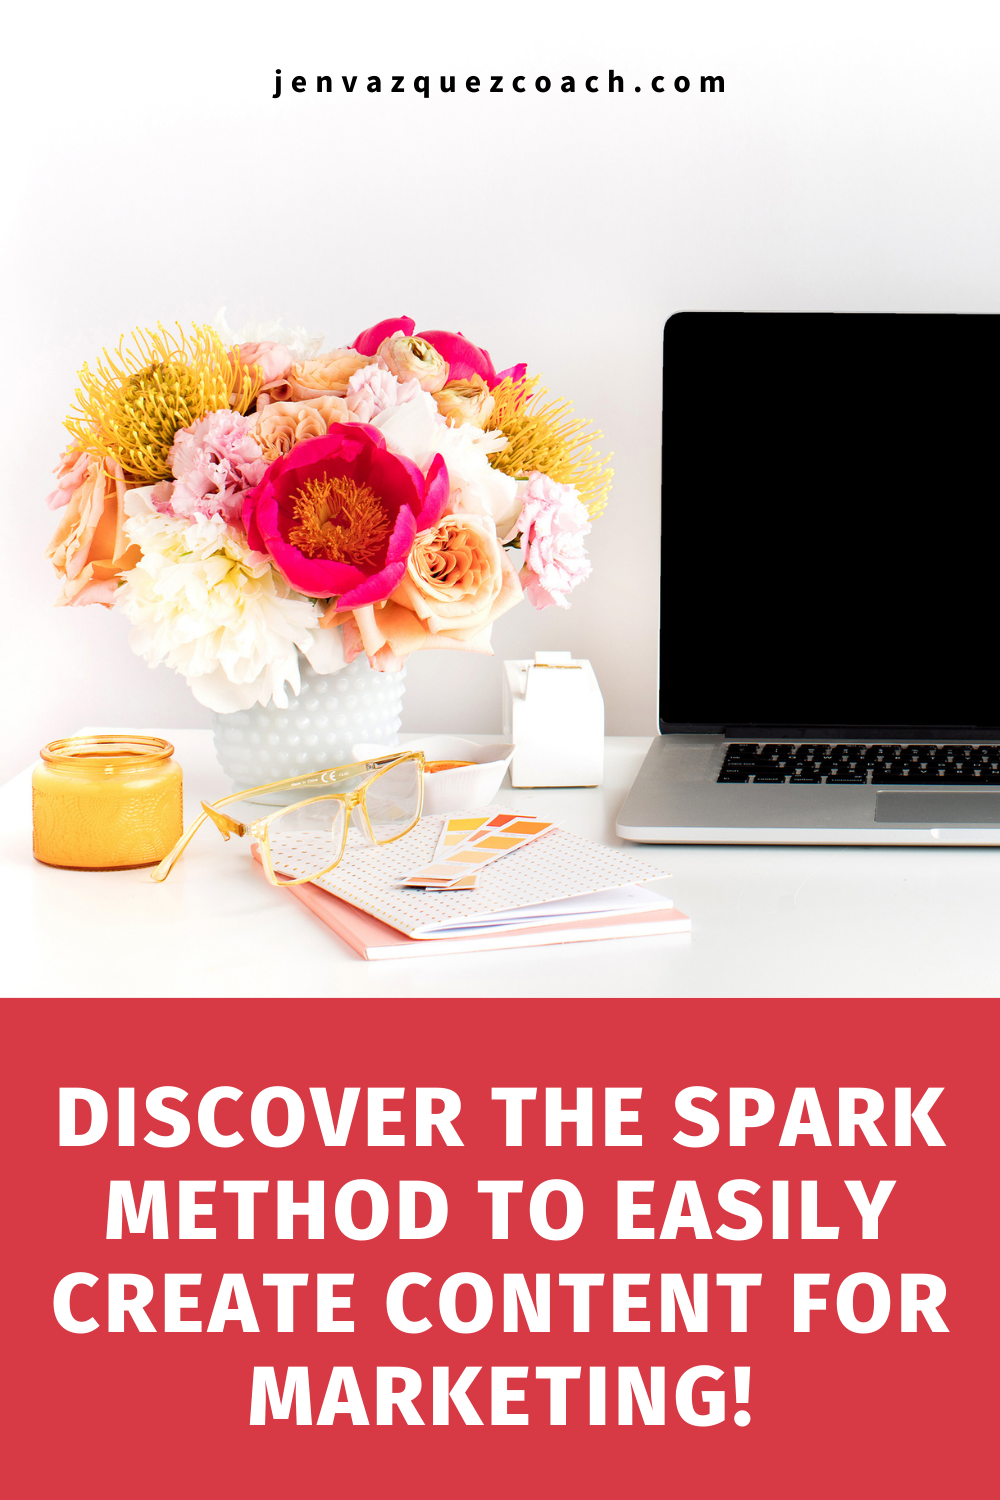 Master the Art of Content Creation with the SPARK Method for SEO-Driven Marketing! by Jen Vazquez Media